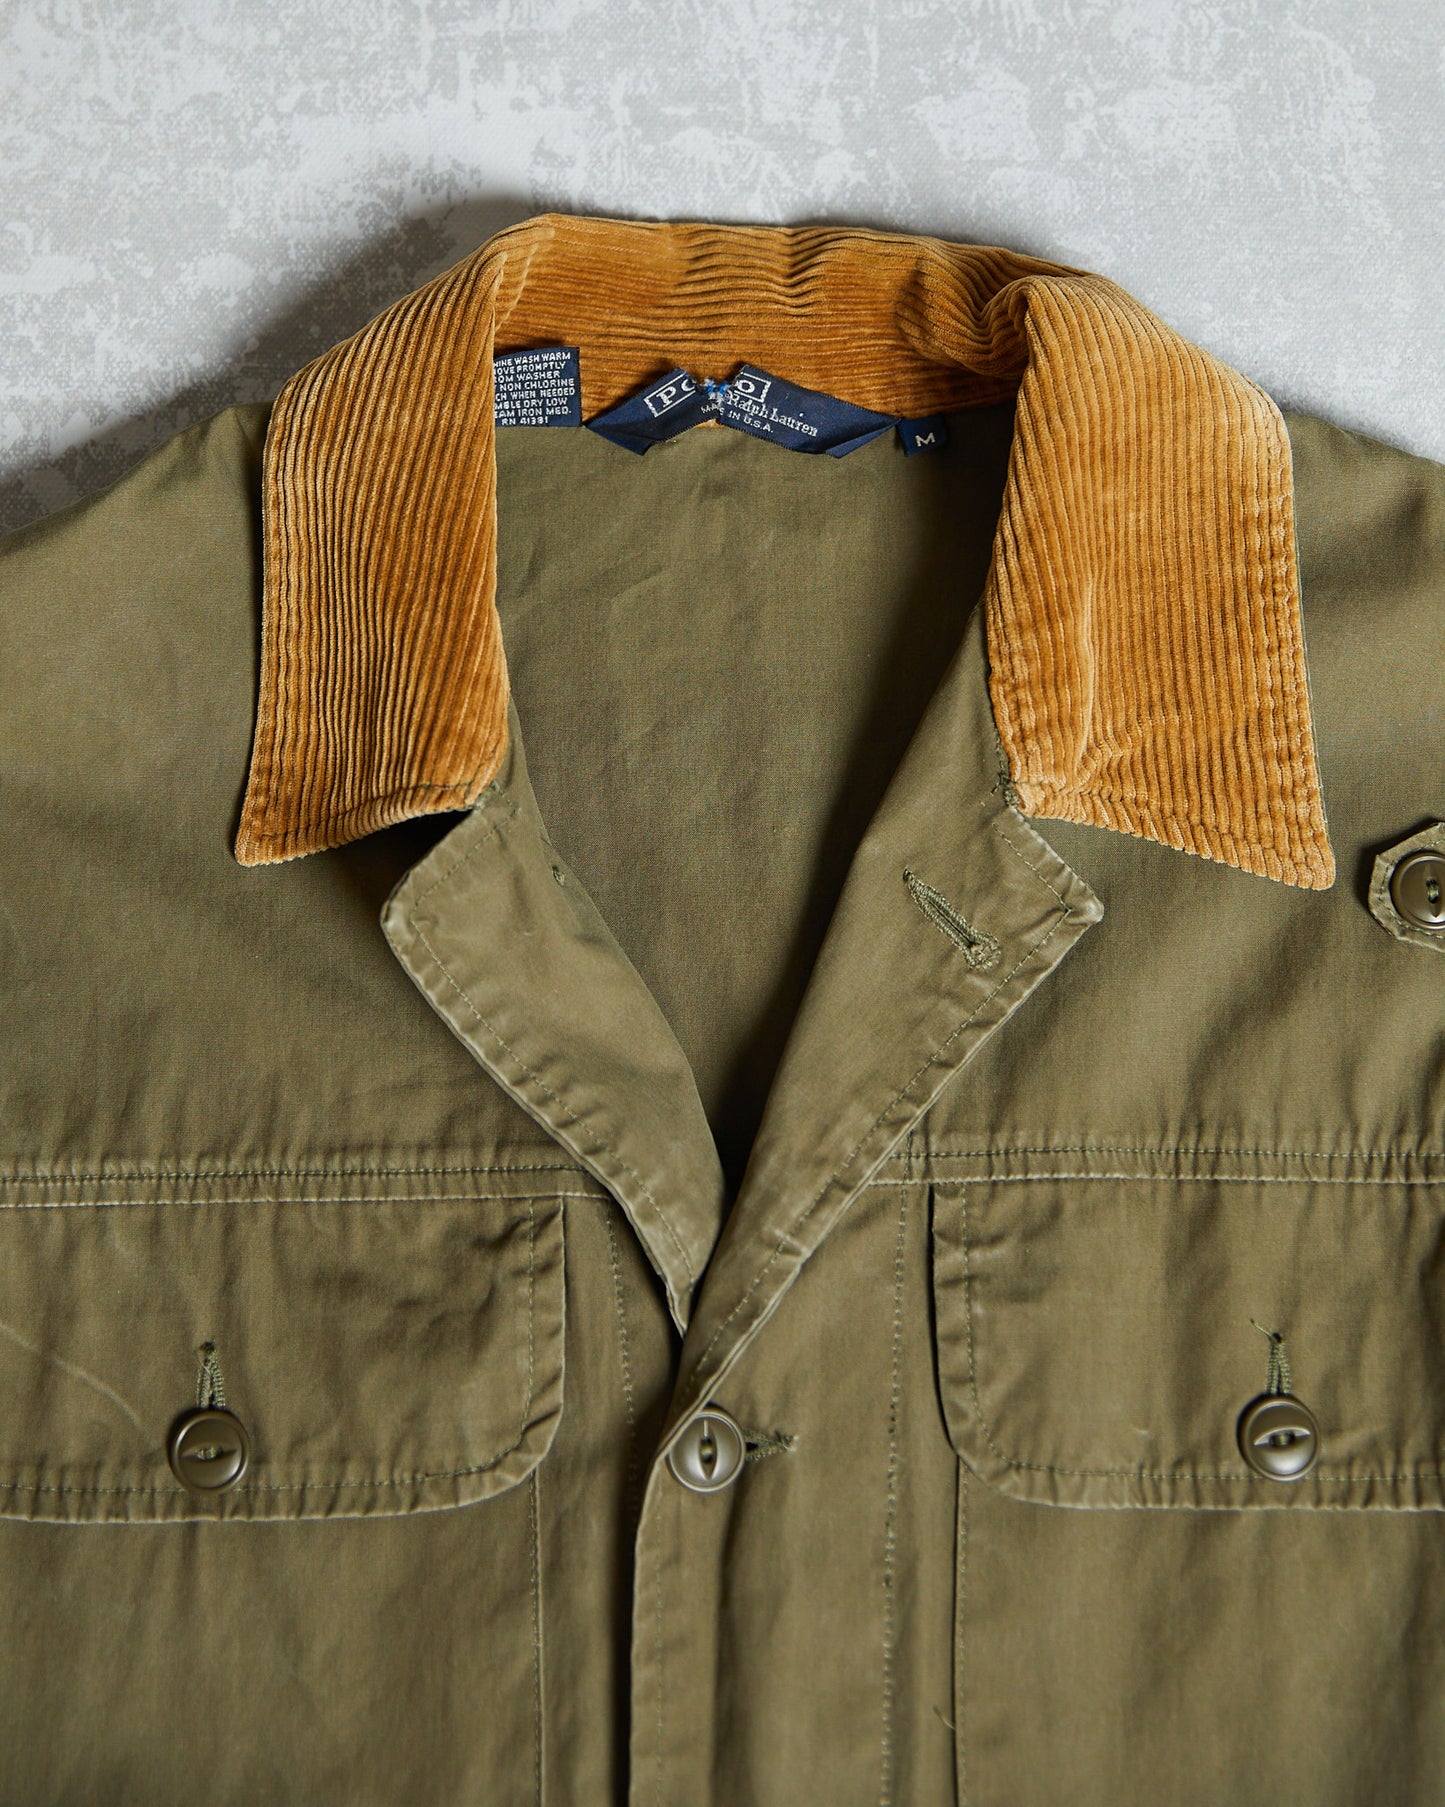 Vintage polo ralph lauren Olive green chore coat with brown corduroy collar and cuffs